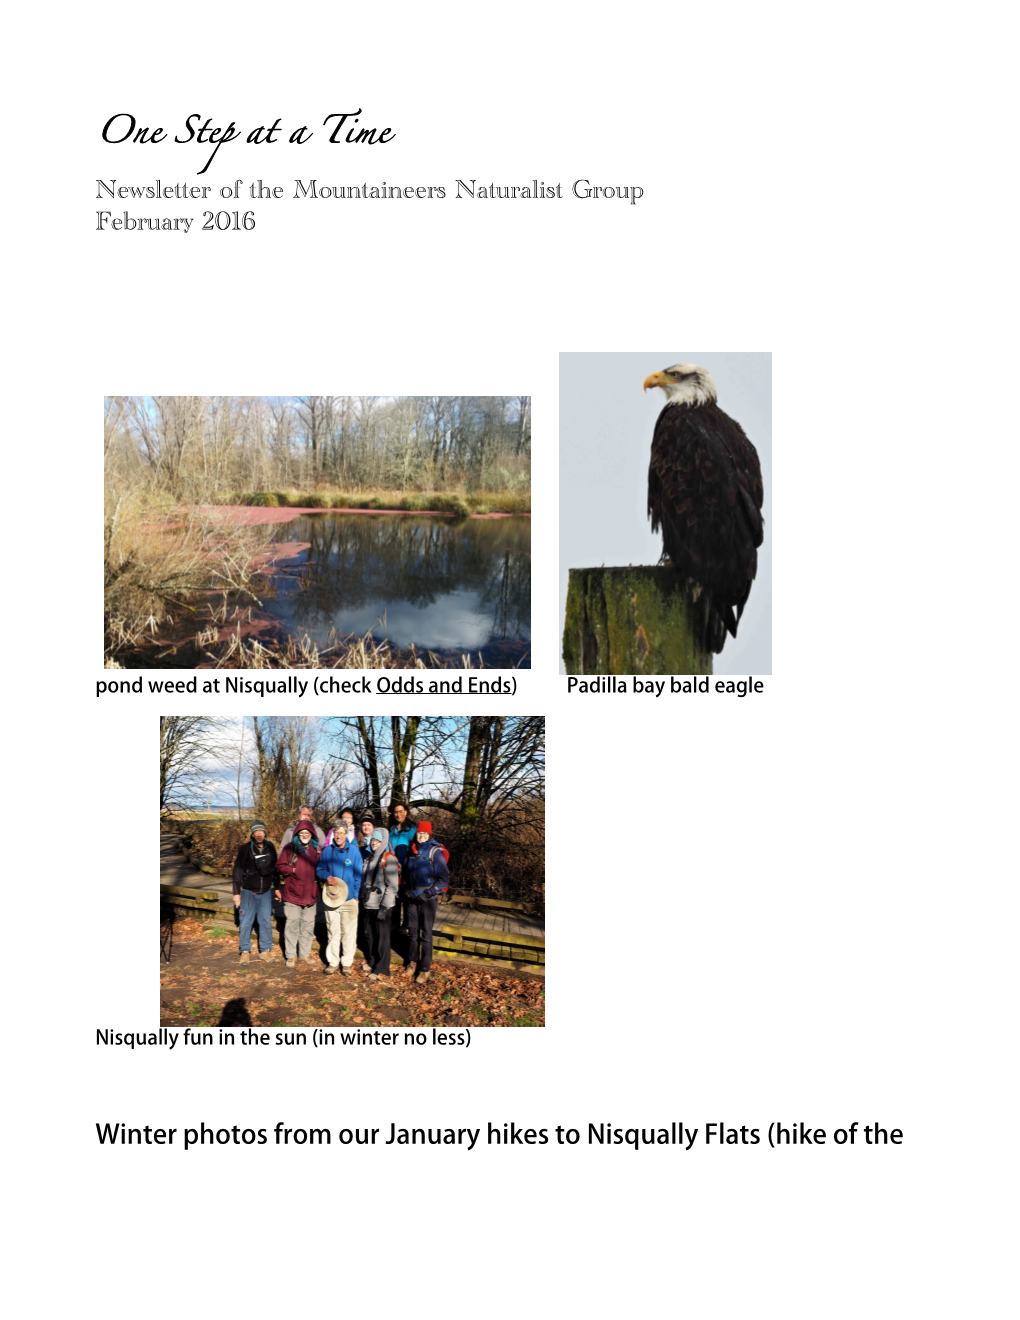 Newsletter of the Mountaineers Naturalist Group February 2016